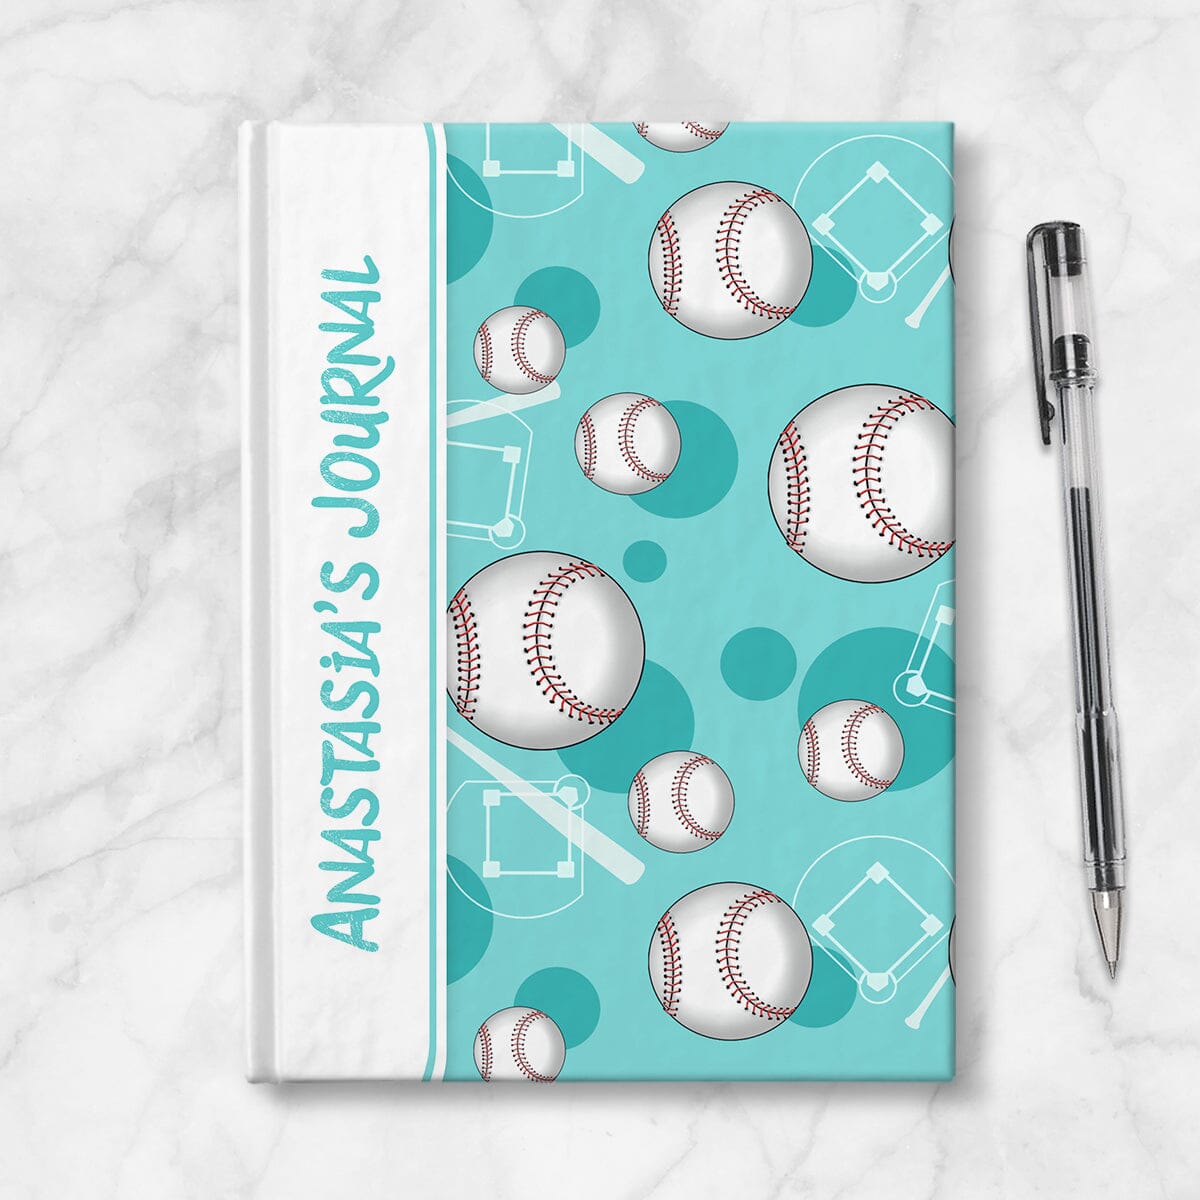 Personalized Teal Baseball Journal at Artistically Invited. Image shows the book on a countertop next to a pen.